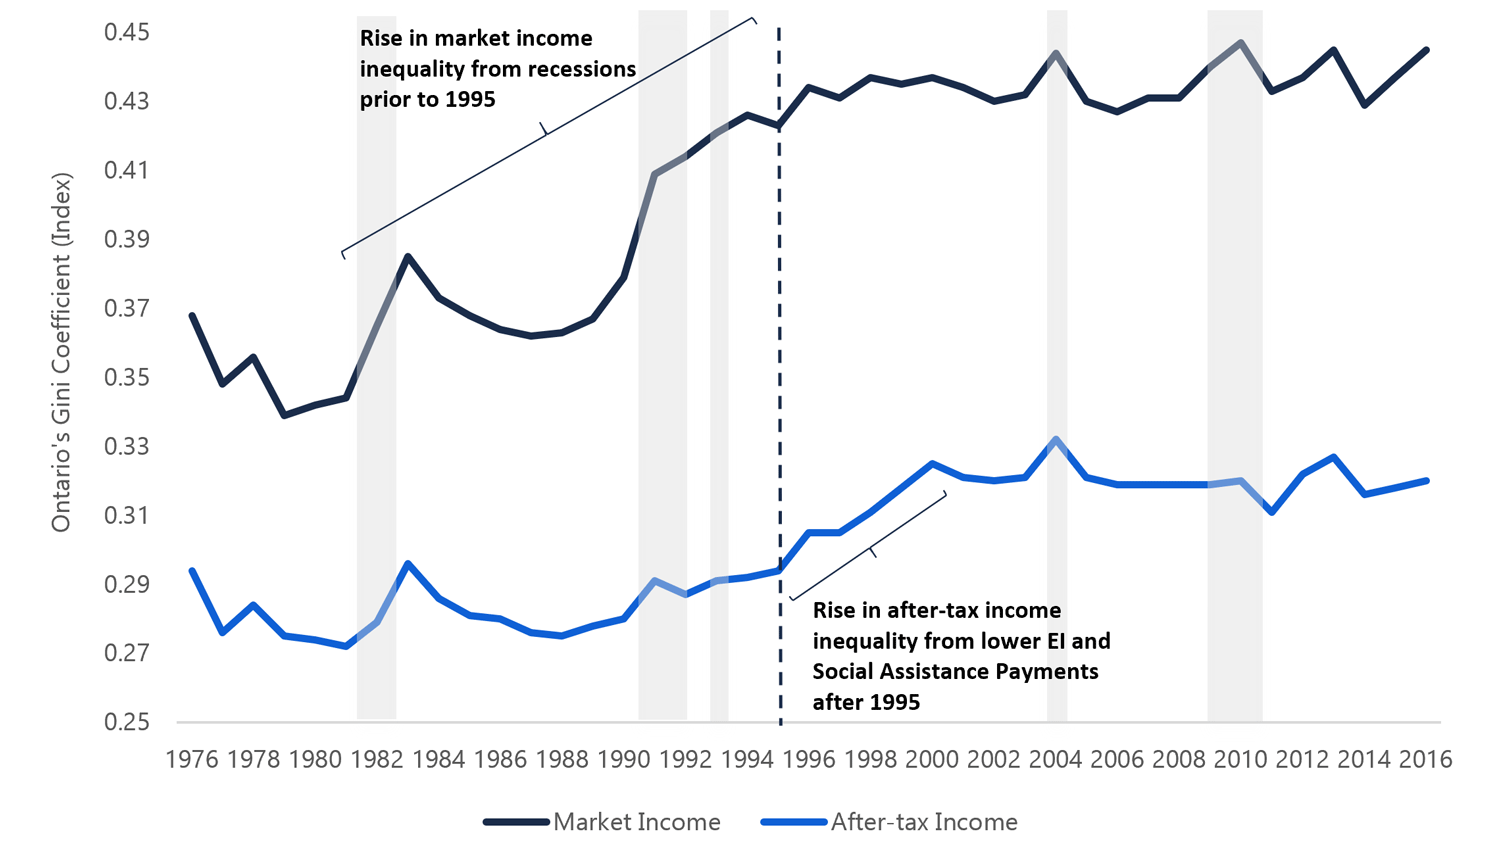 2.3 Lower transfers in the 1990s raised after-tax income inequality